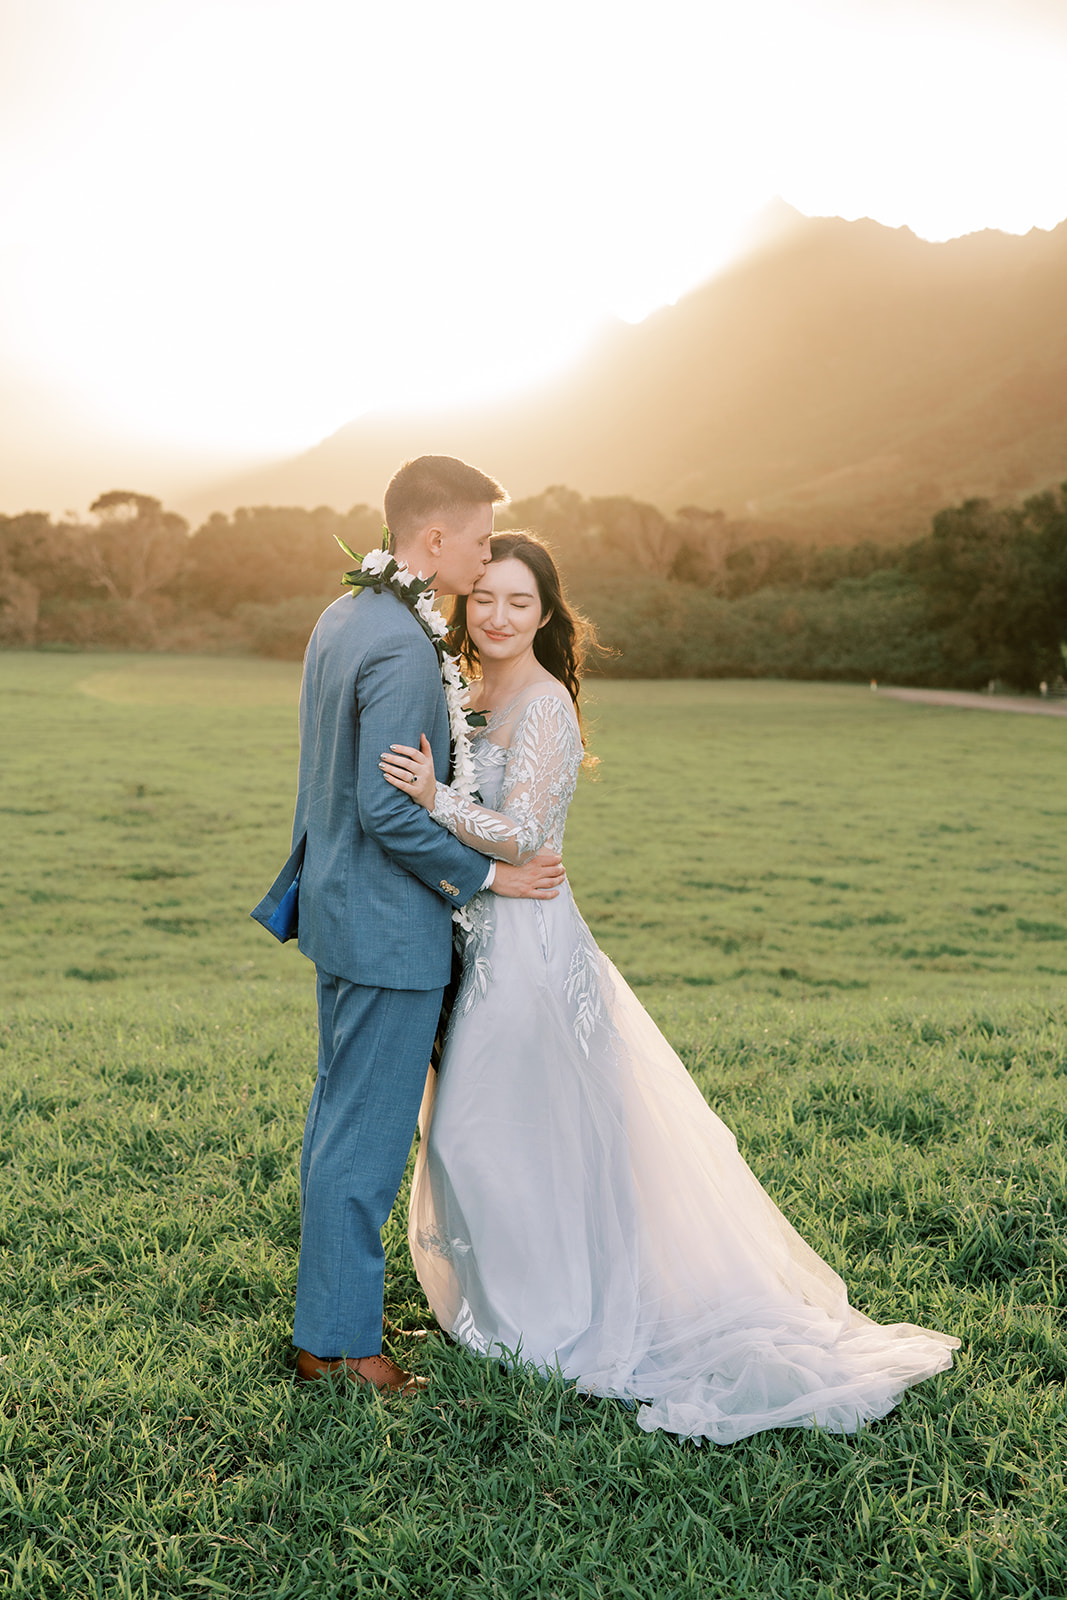 A bride and groom embrace in a field at Kualoa Ranch during their destination wedding at sunset.